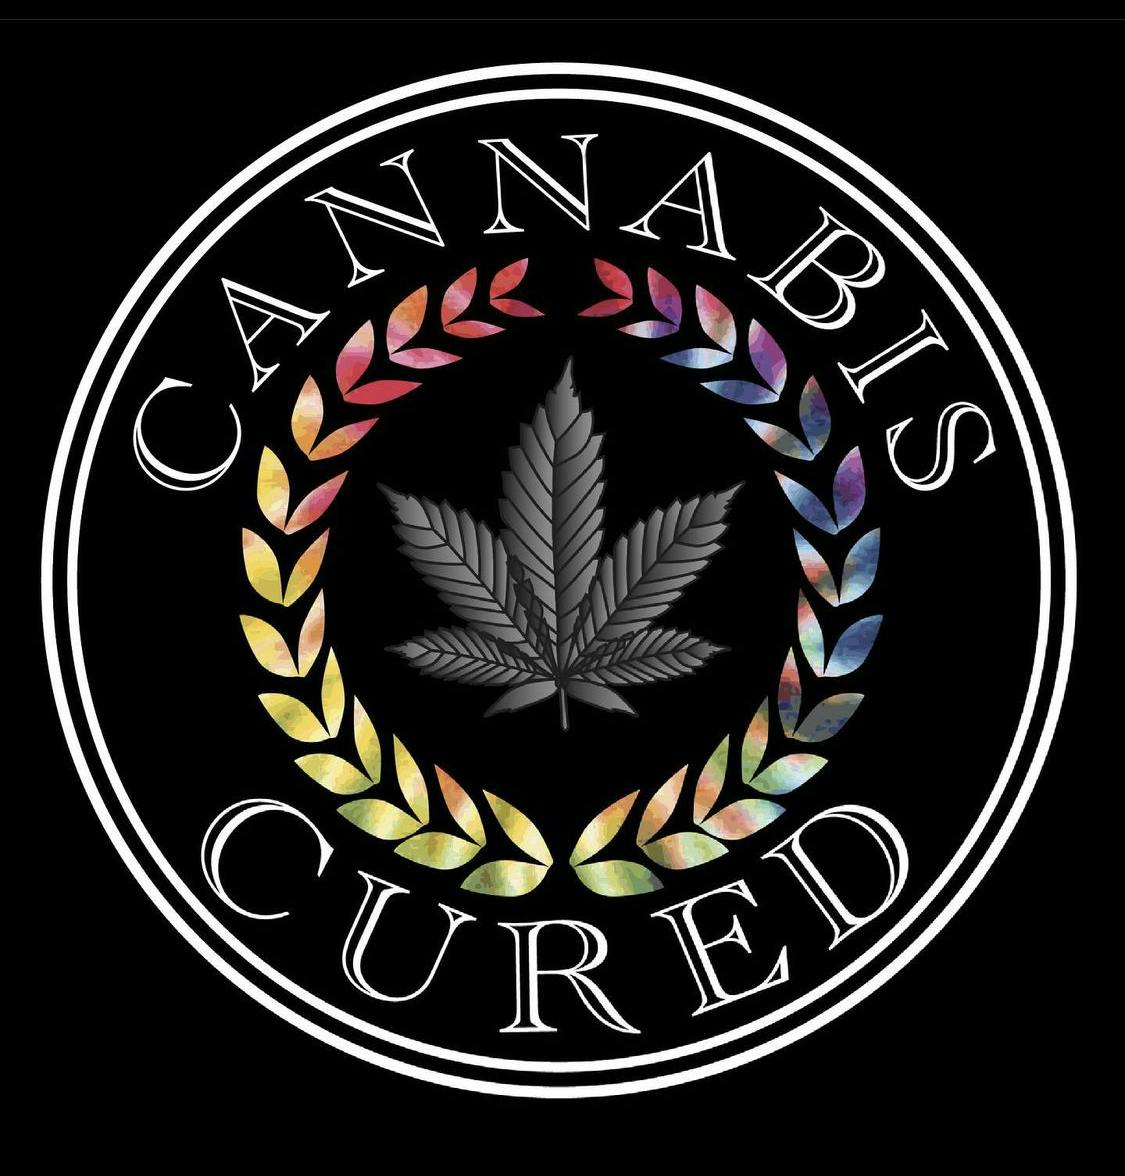 Cannabis Cured Sugarloaf Recreational Weed Dispensary